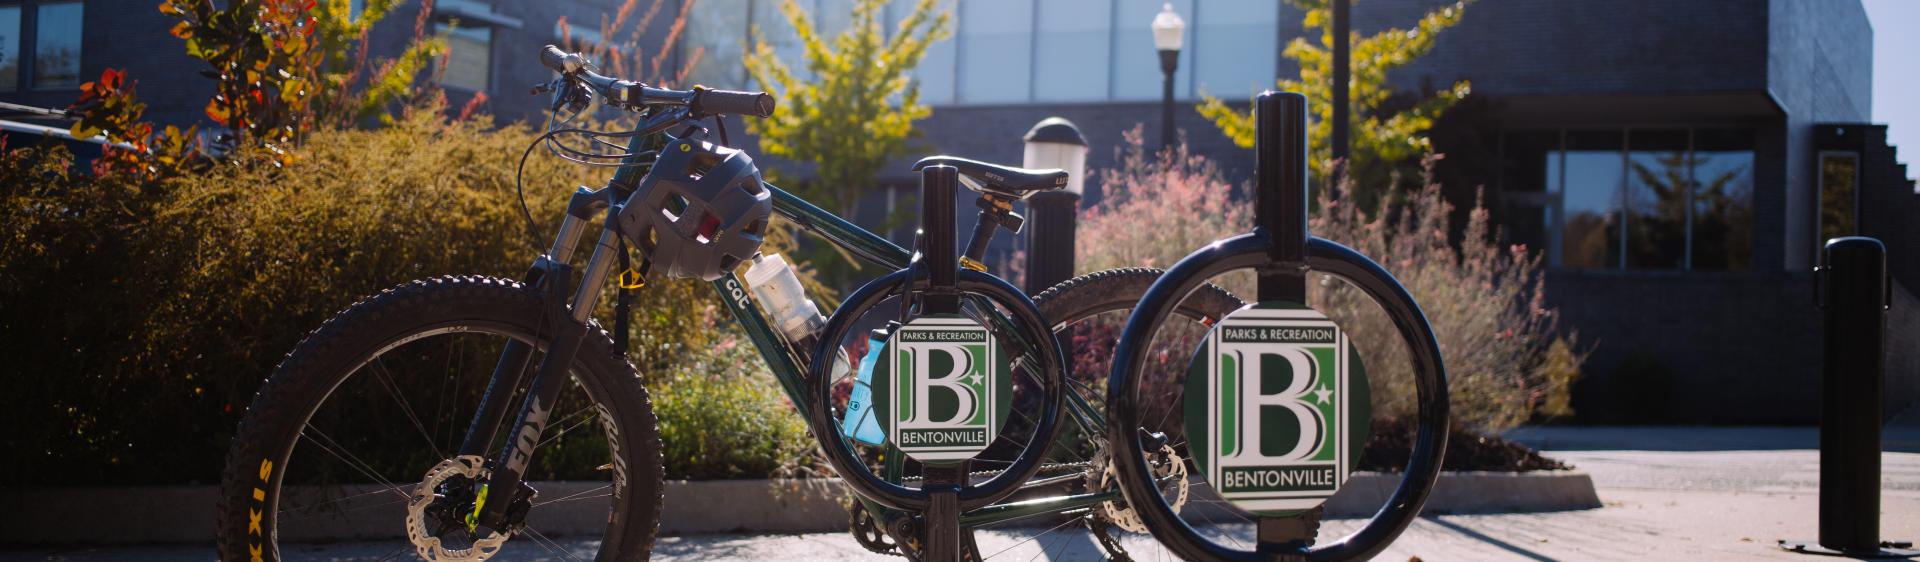 Art & Cycling: 5 Must-Try Experiences in Bentonville